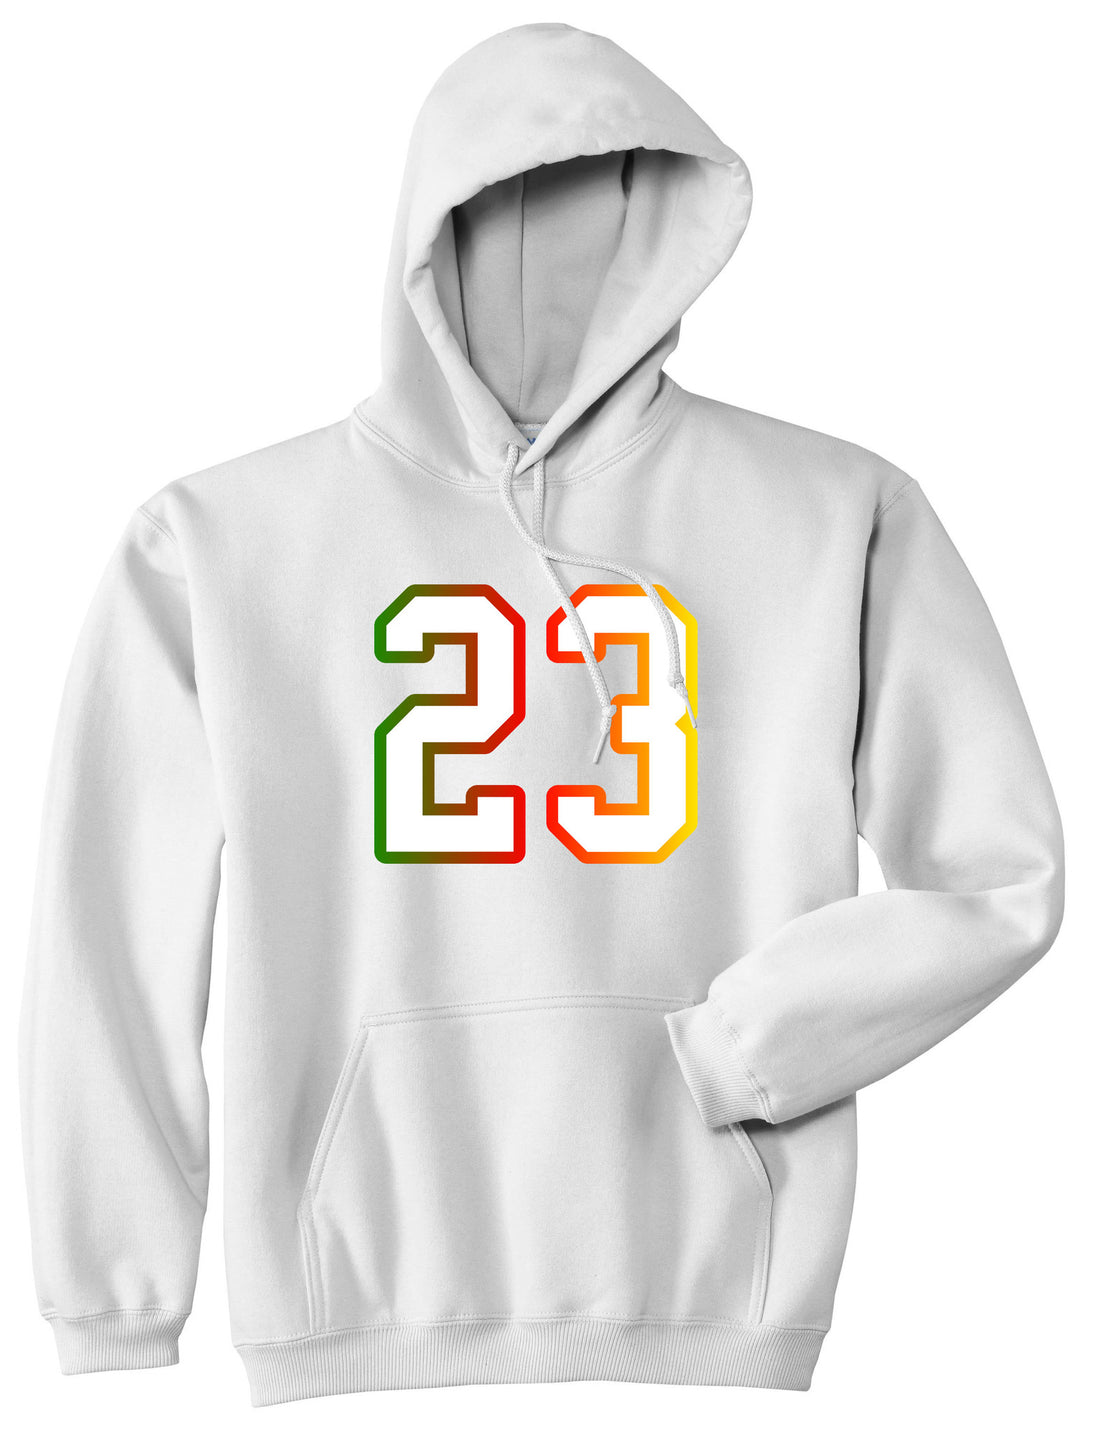 23 Cement Print Colorful Jersey Pullover Hoodie in White By Kings Of NY